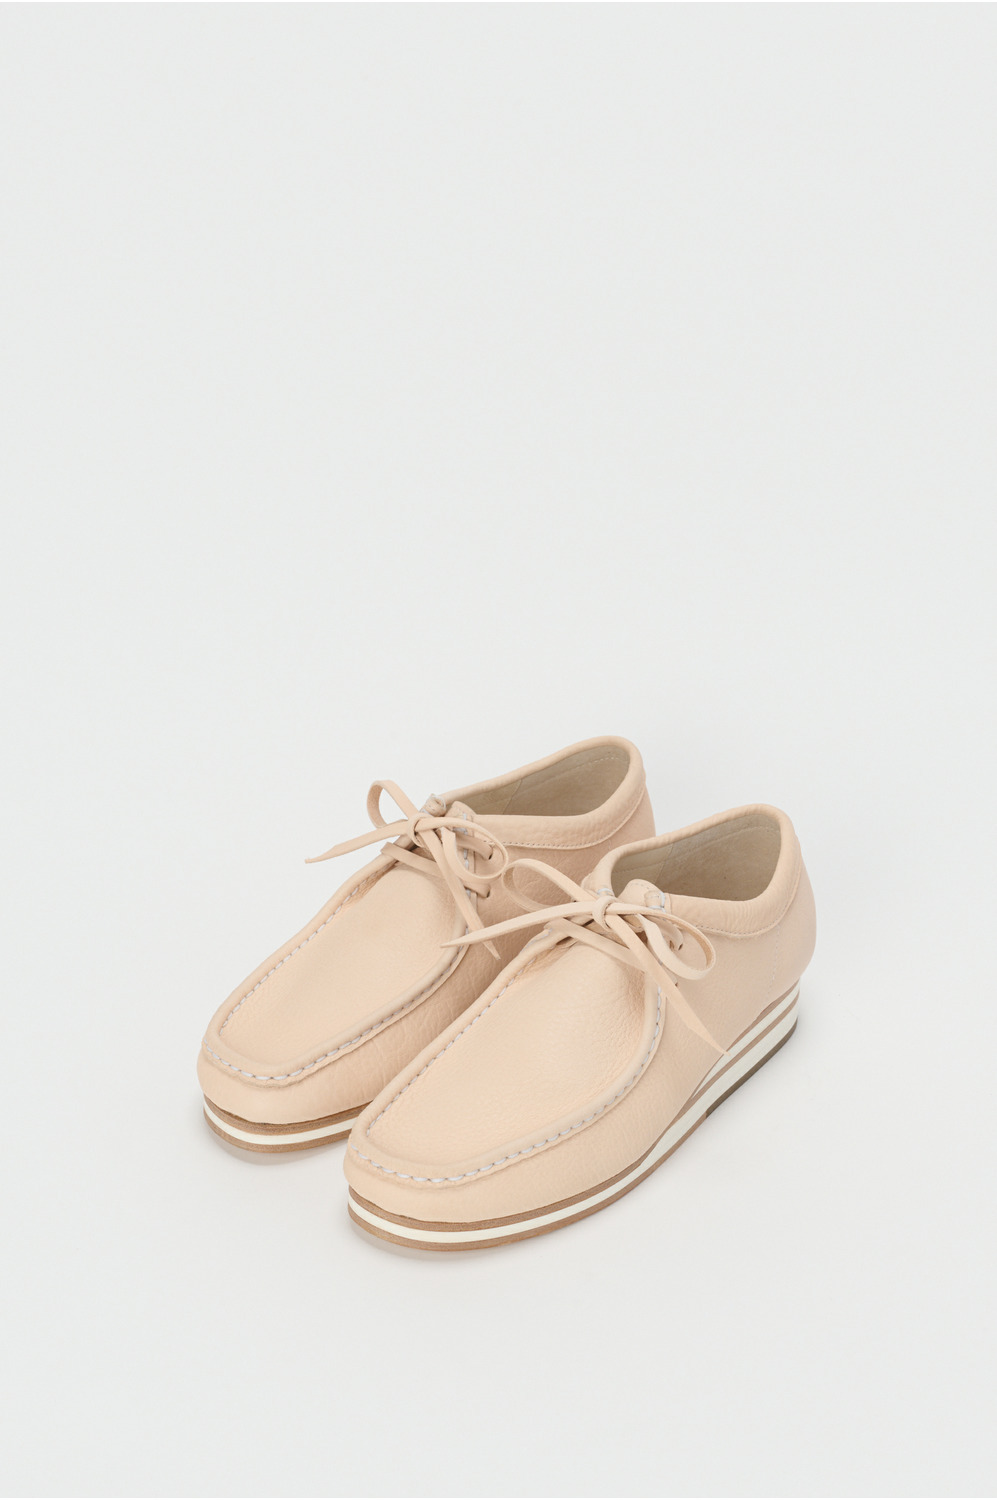 manual industrial products 29｜スキマ Hender Scheme Official